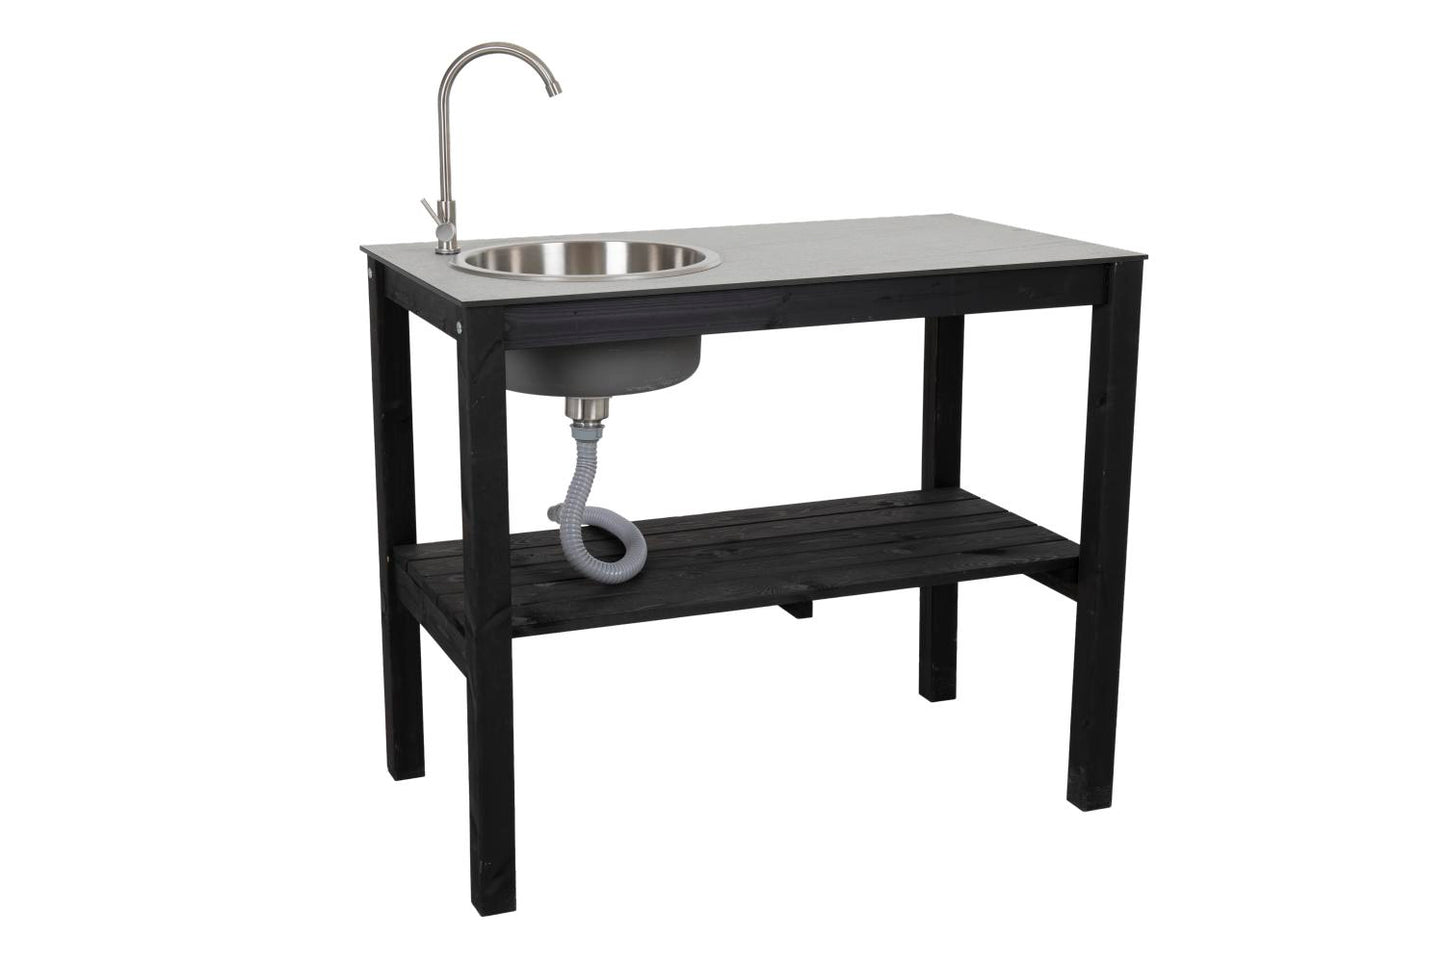 Holma Outdoor kitchen bench section with sink